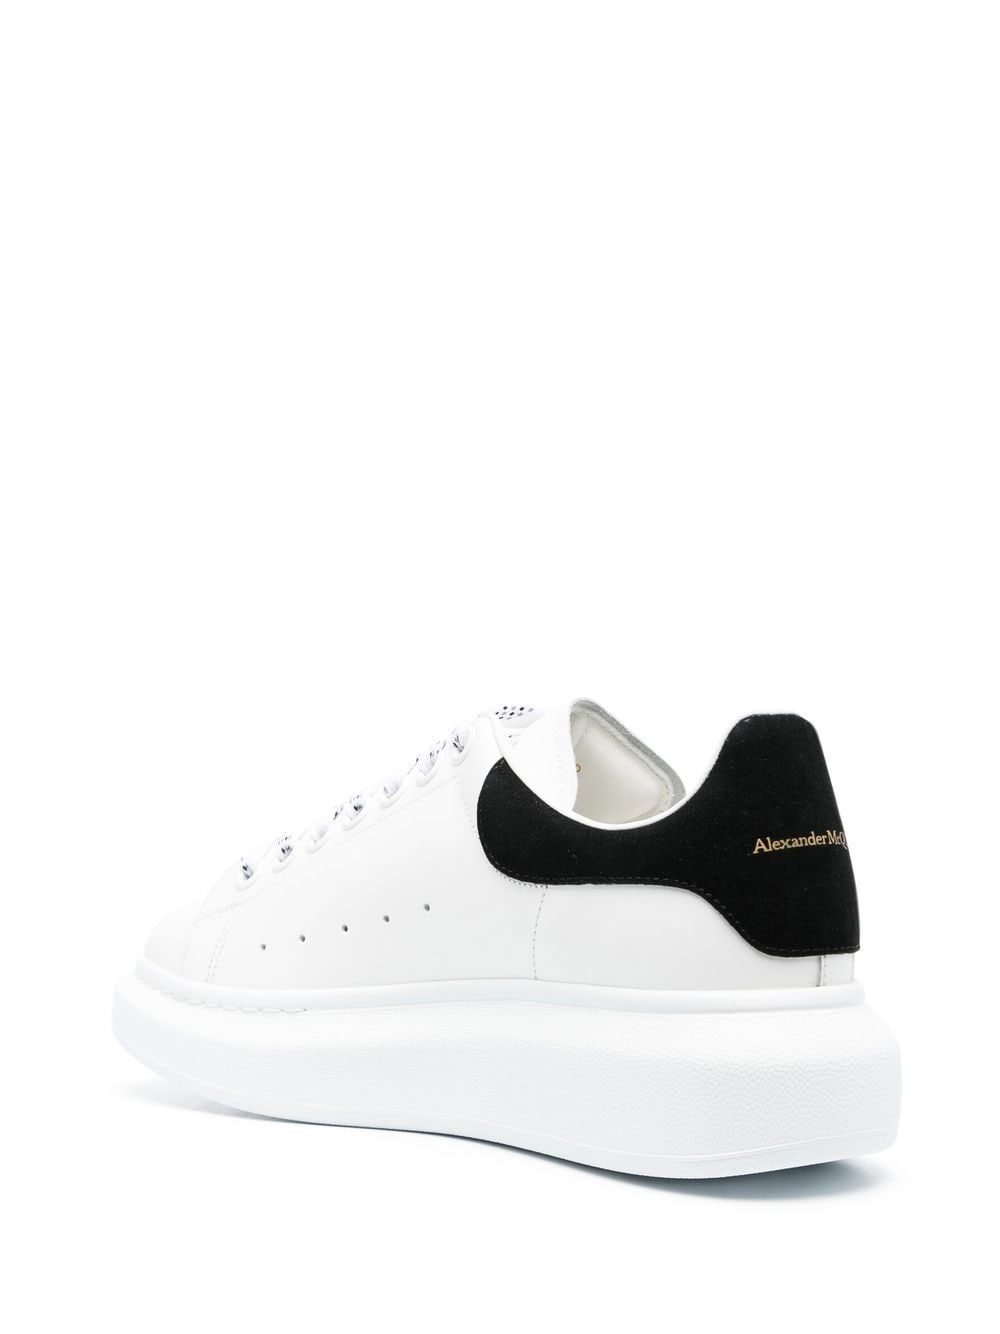 ALEXANDER MCQUEEN Oversized Leather Sneakers with Removable Insole and Gold Embellishments